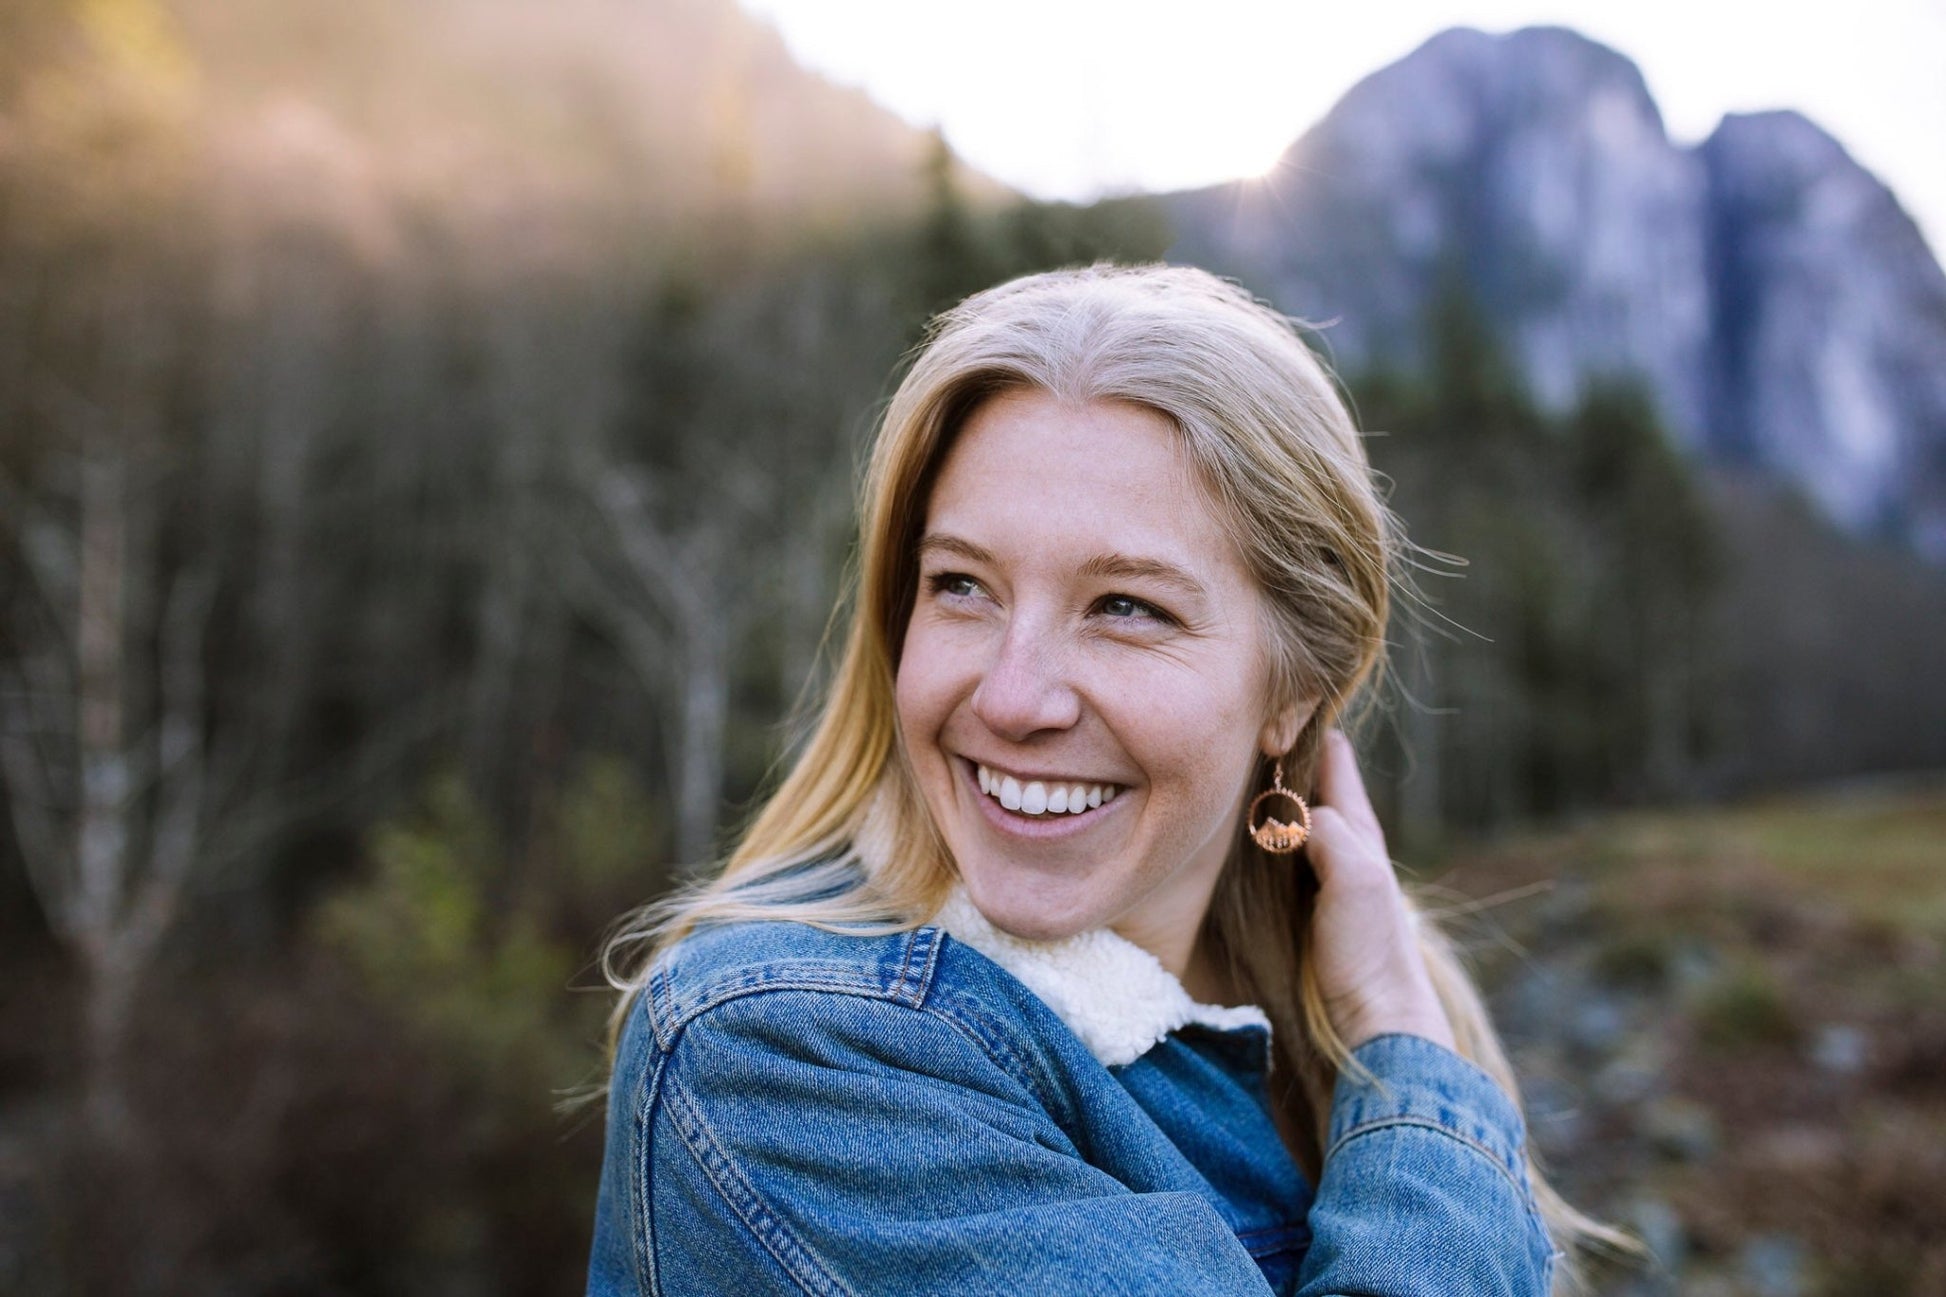 18k gold plated earrings shown on smiling model with the Stawamus chief behind her